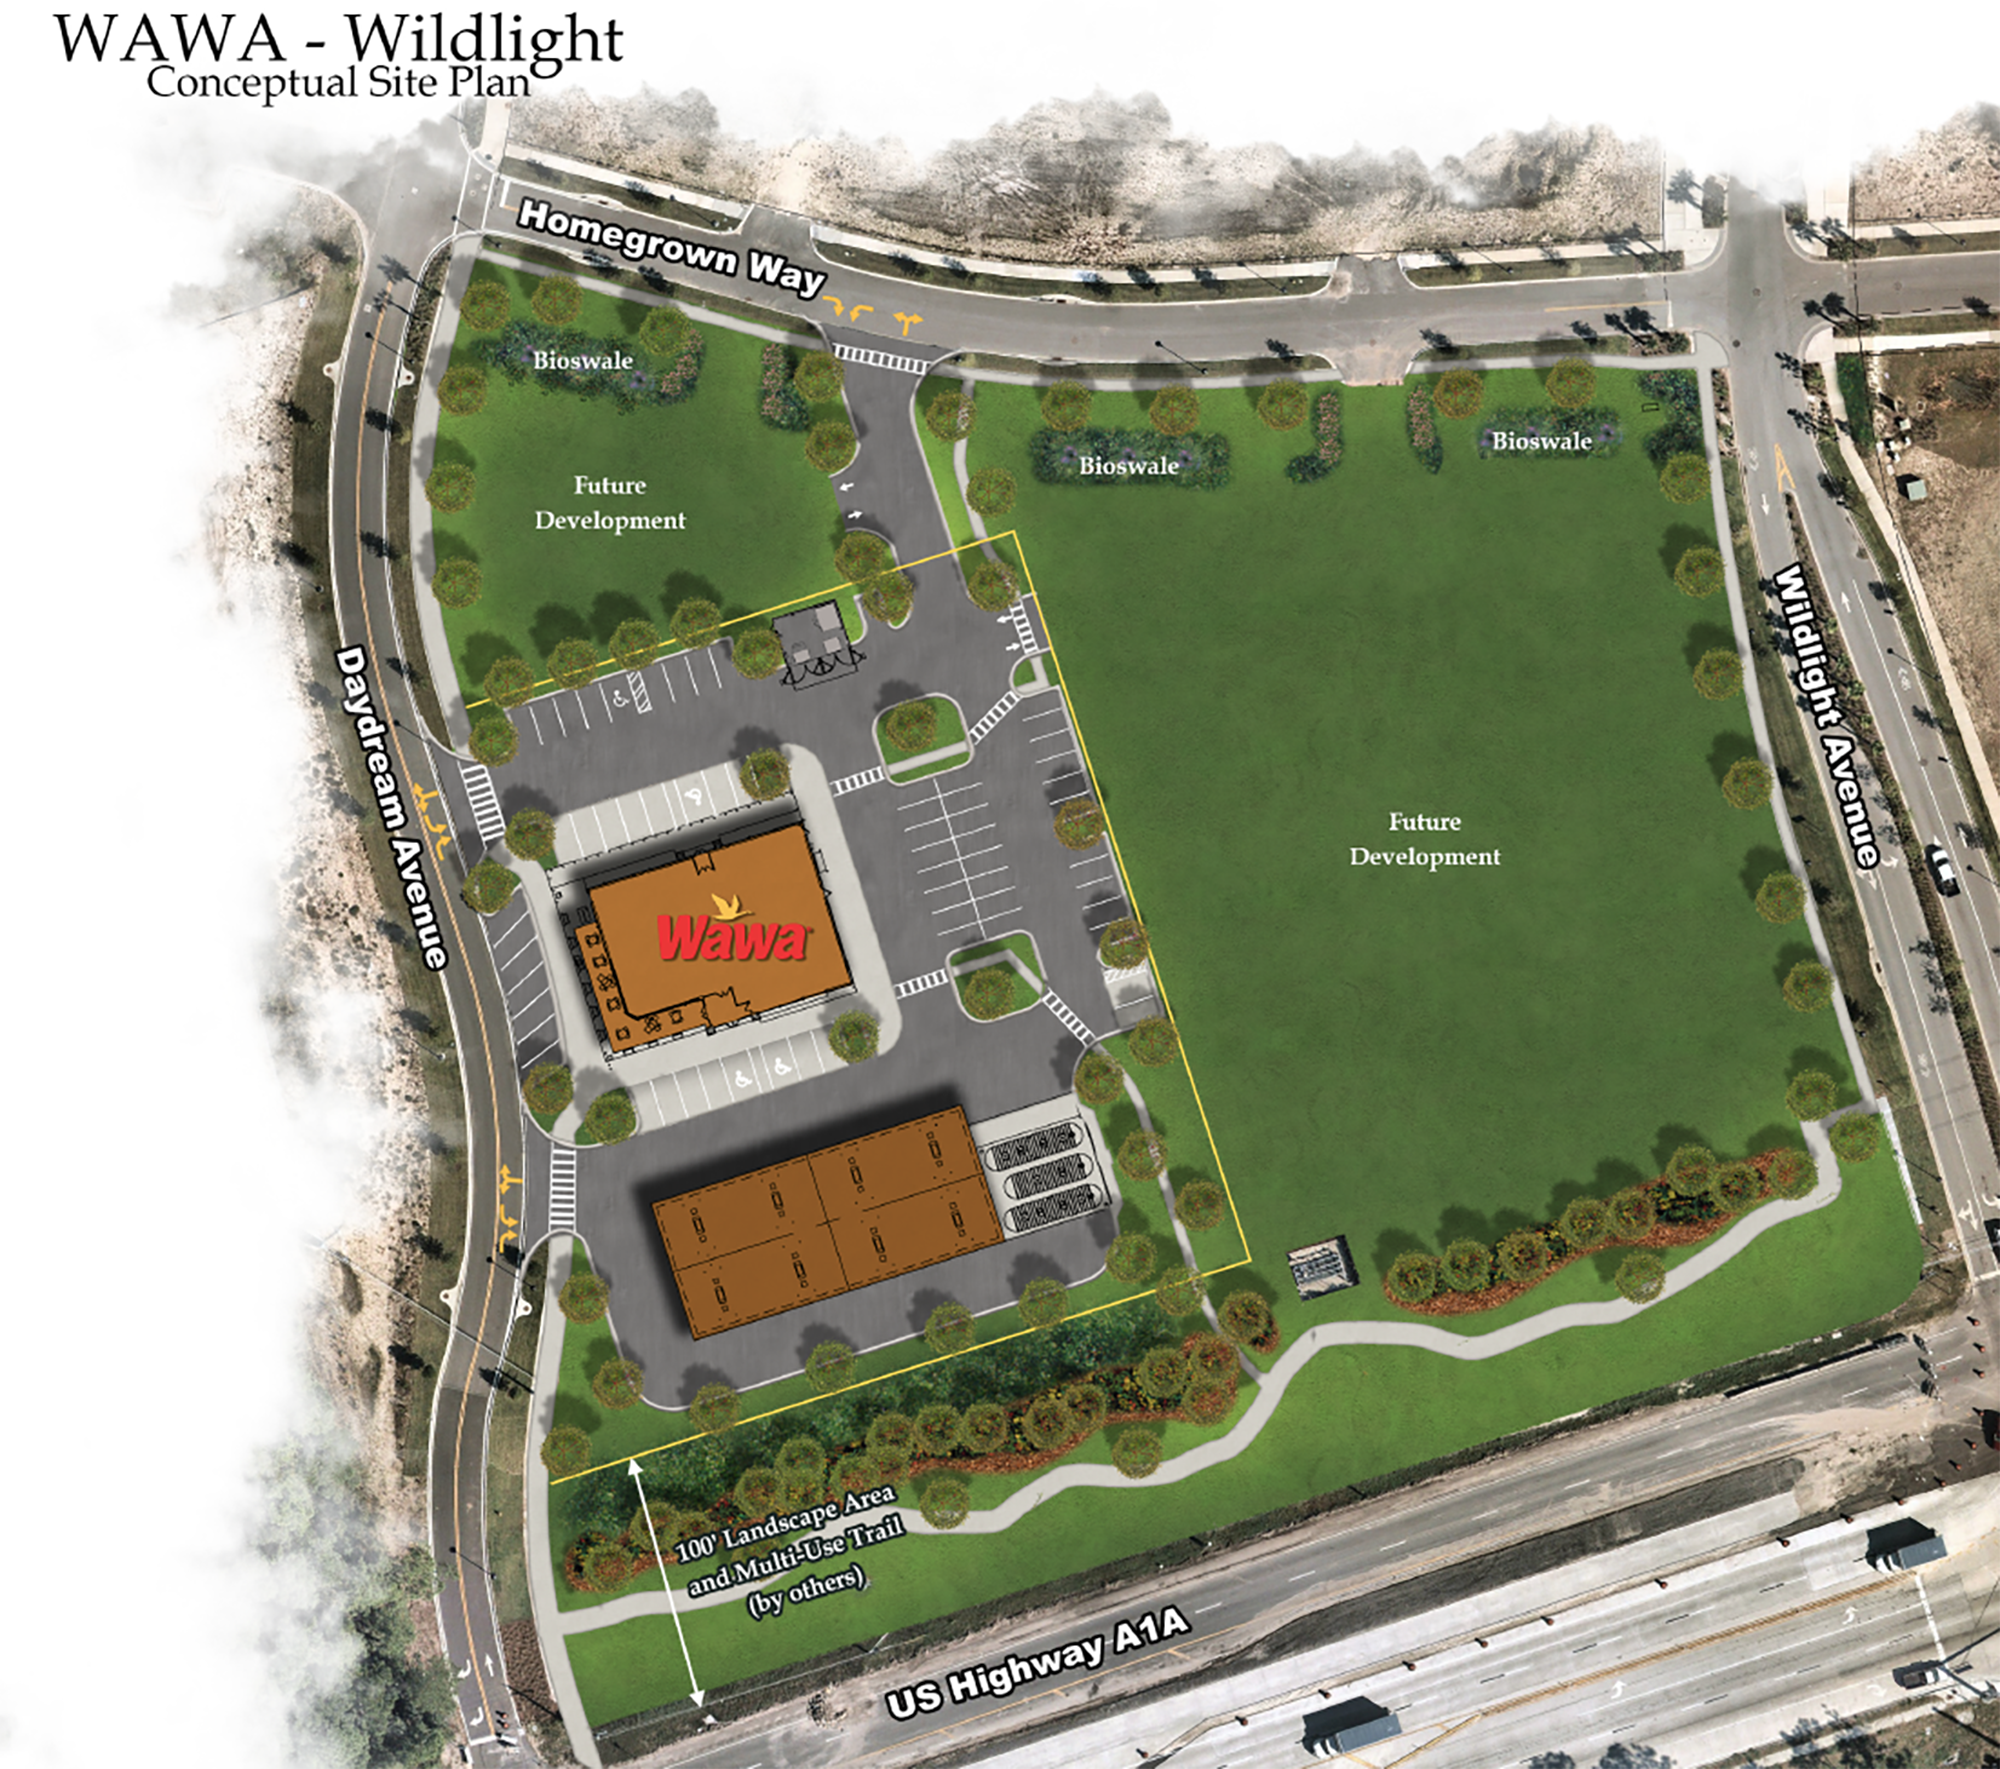 The conceptual site plan for the Wildlight Wawa.